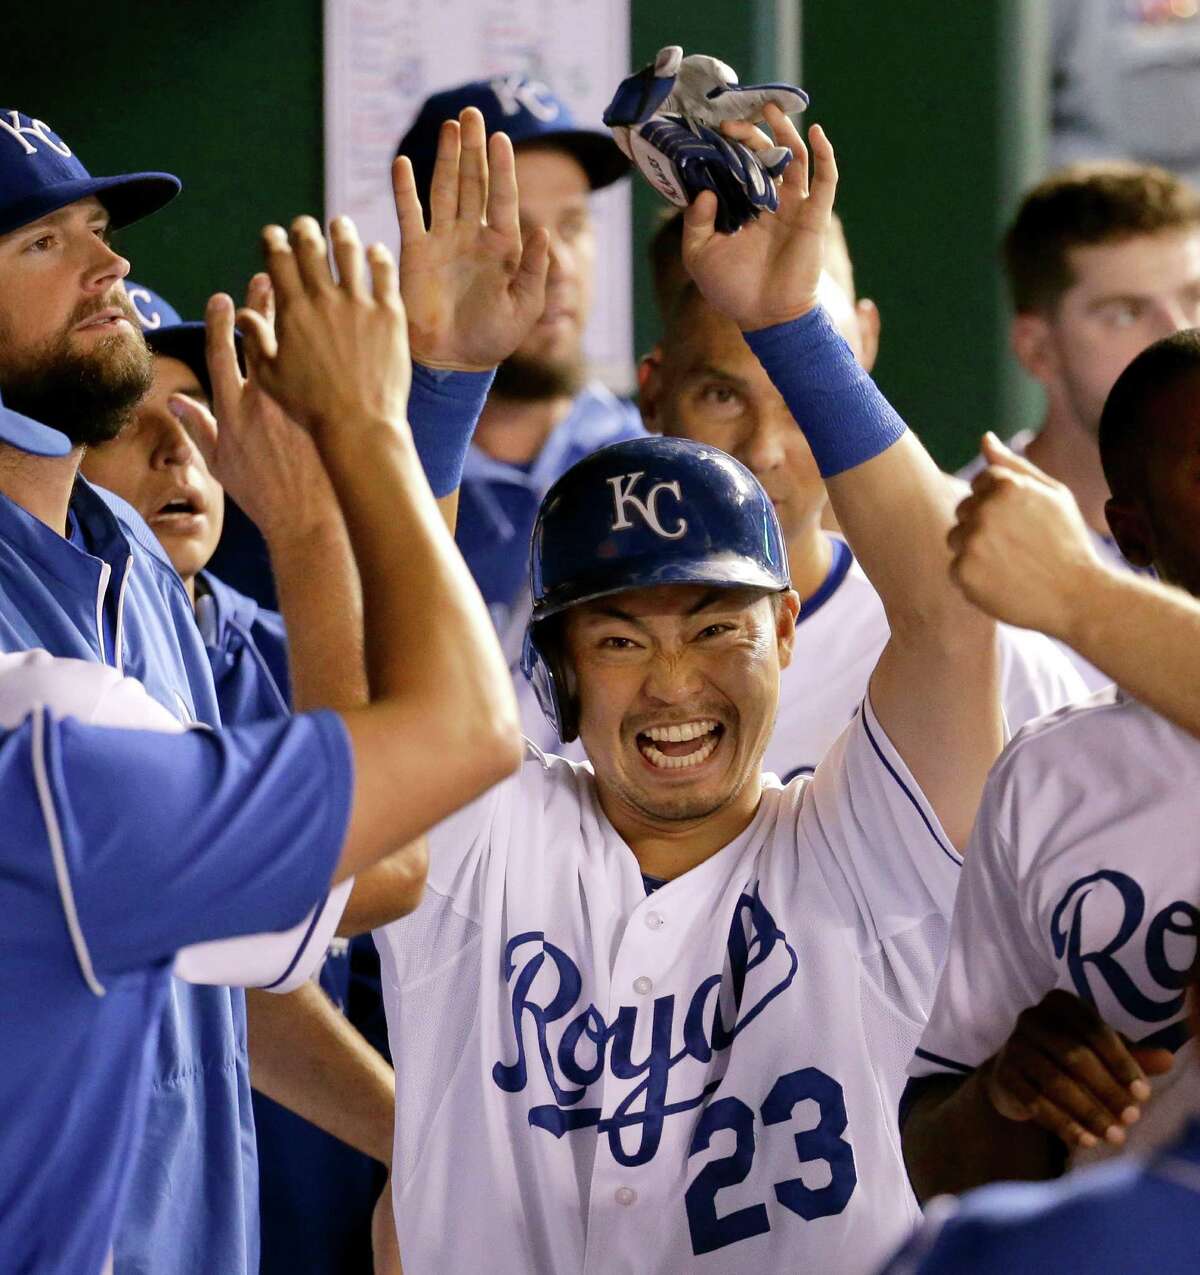 The Royals' Norichika Aoki (23) is all smiles in the dugout after scoring the go-ahead run in the seventh inning of Monday's game against the Athletics. Kansas City held on for a 3-2 victory, its eighth in a row, pushing it past the Tigers for the top spot in the AL Central.